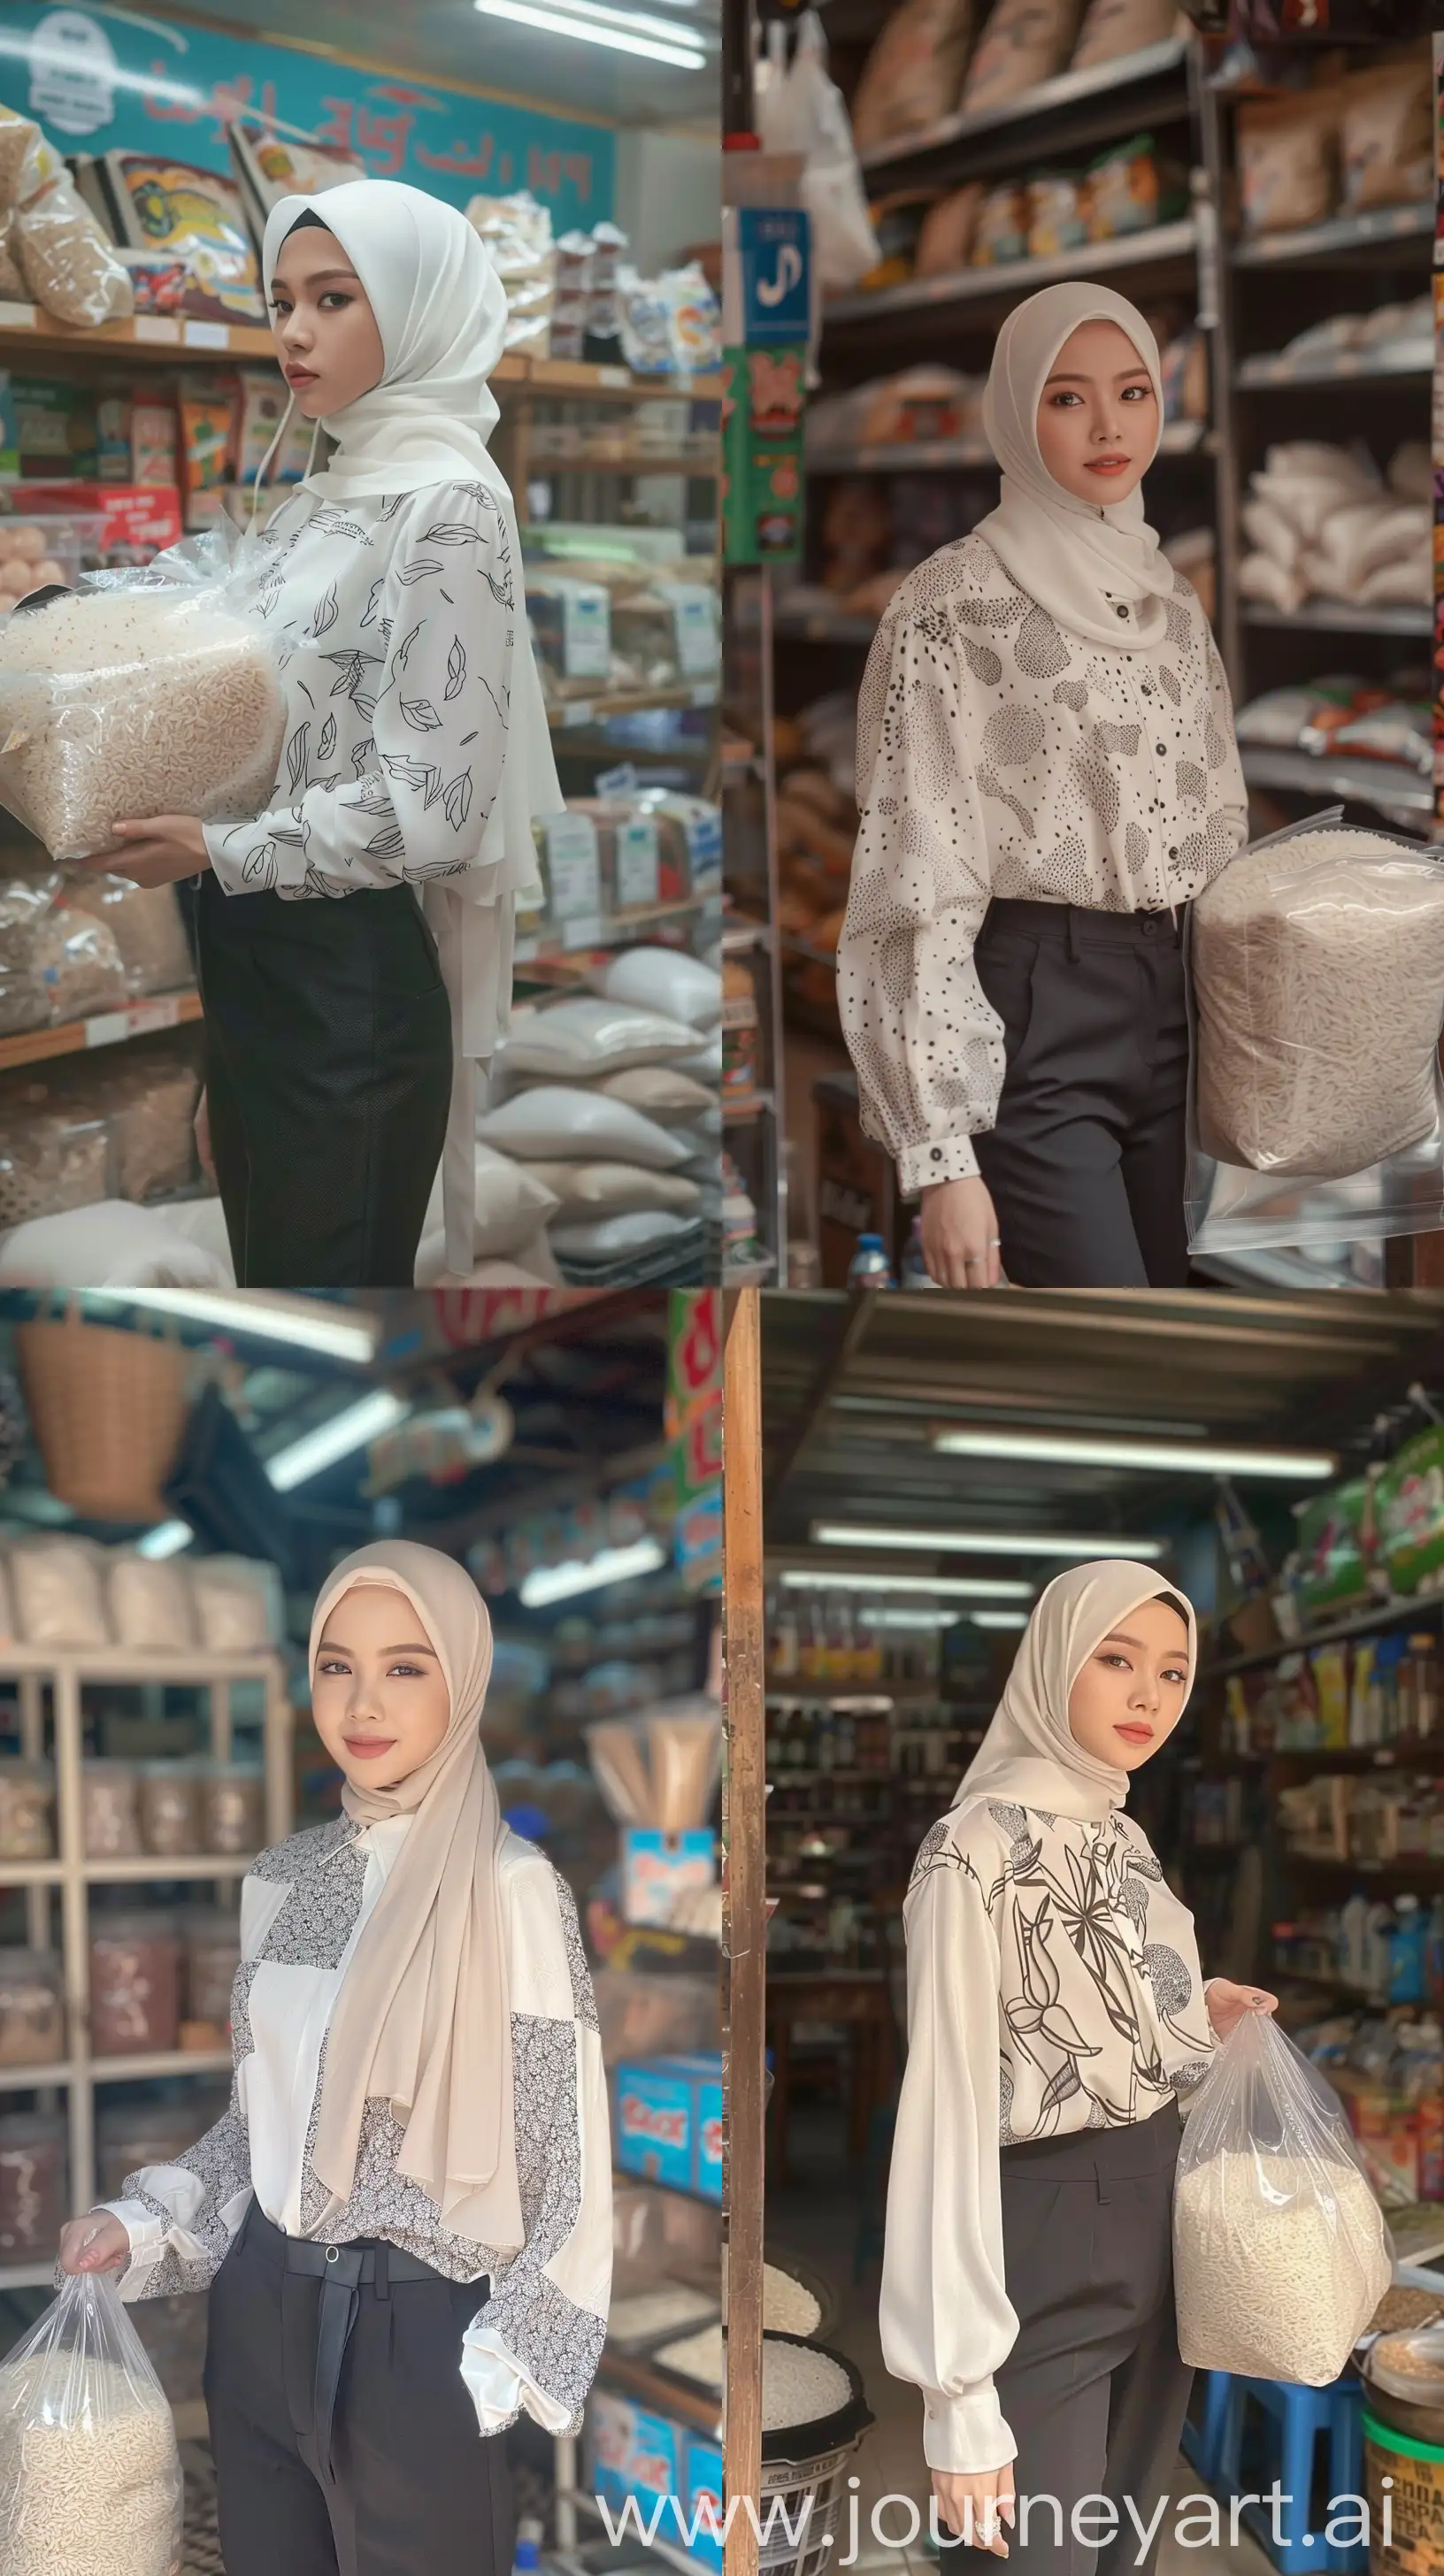 Elegant-Indonesian-Girl-in-Hijab-with-White-Blouse-and-Black-Pants-at-Traditional-Shop